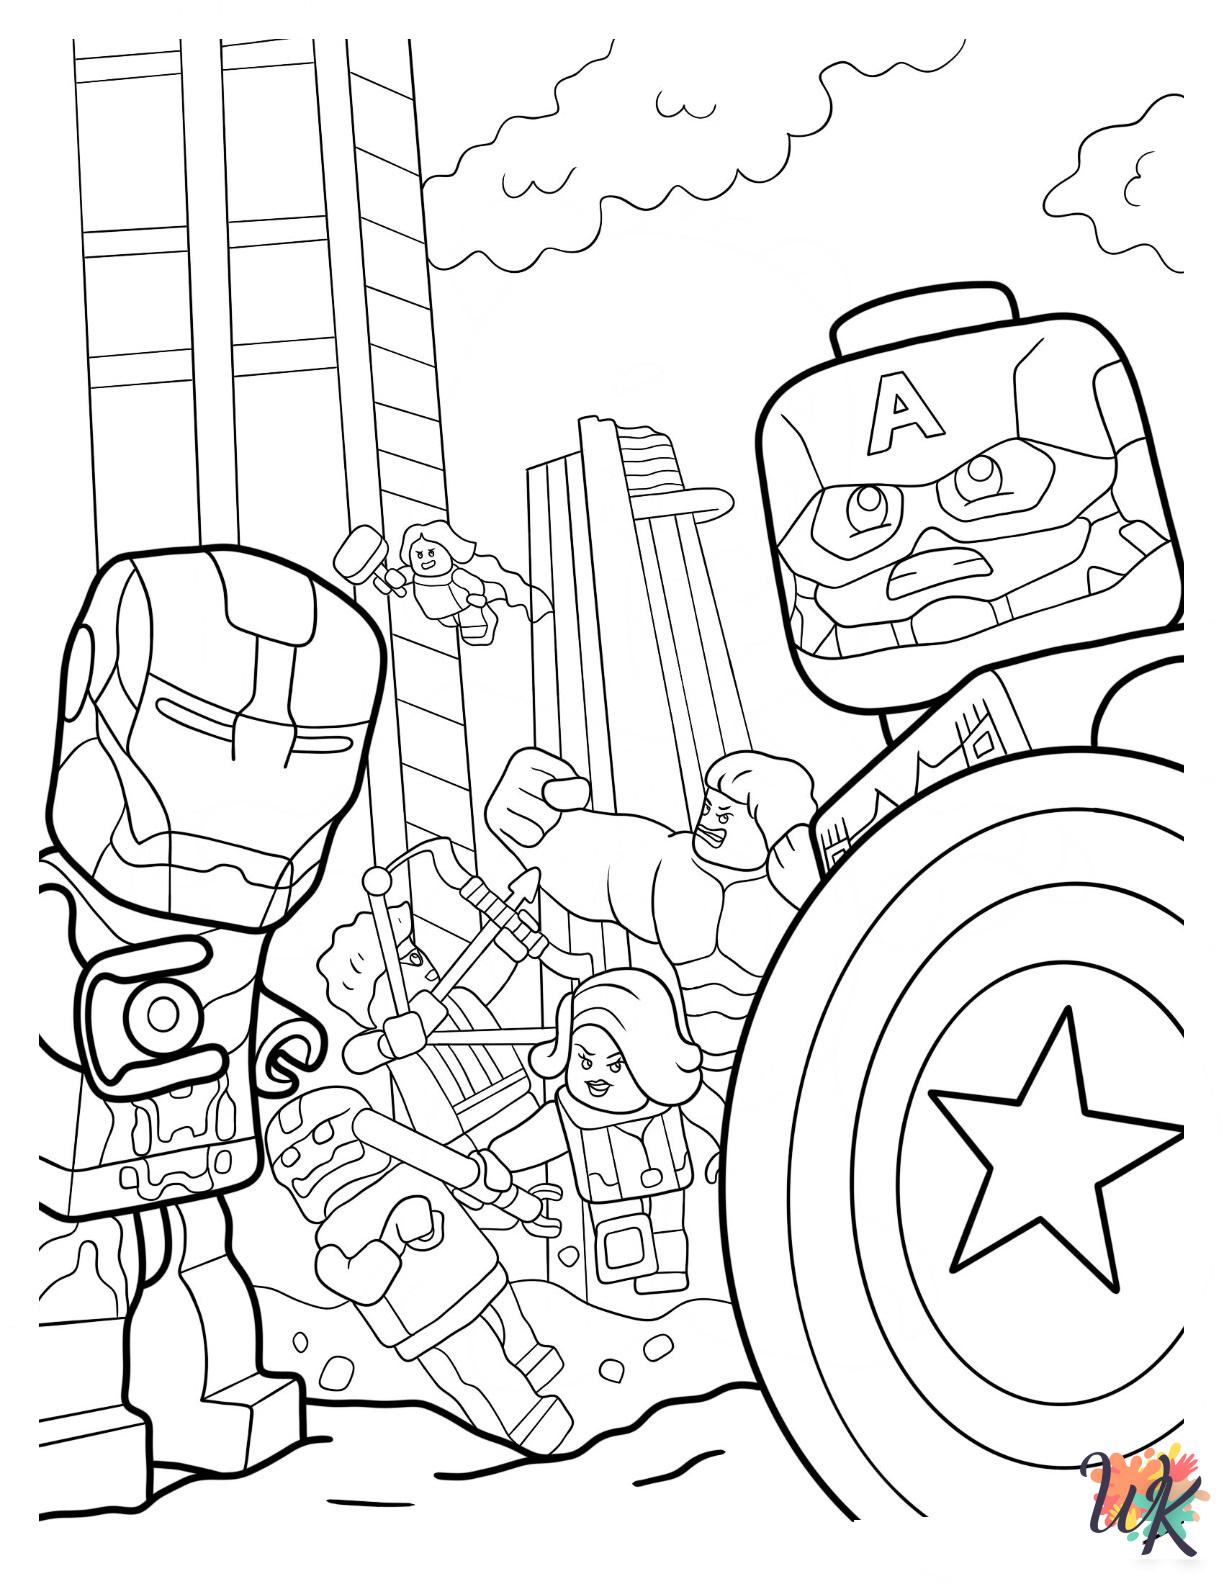 Lego Avengers adult coloring pages